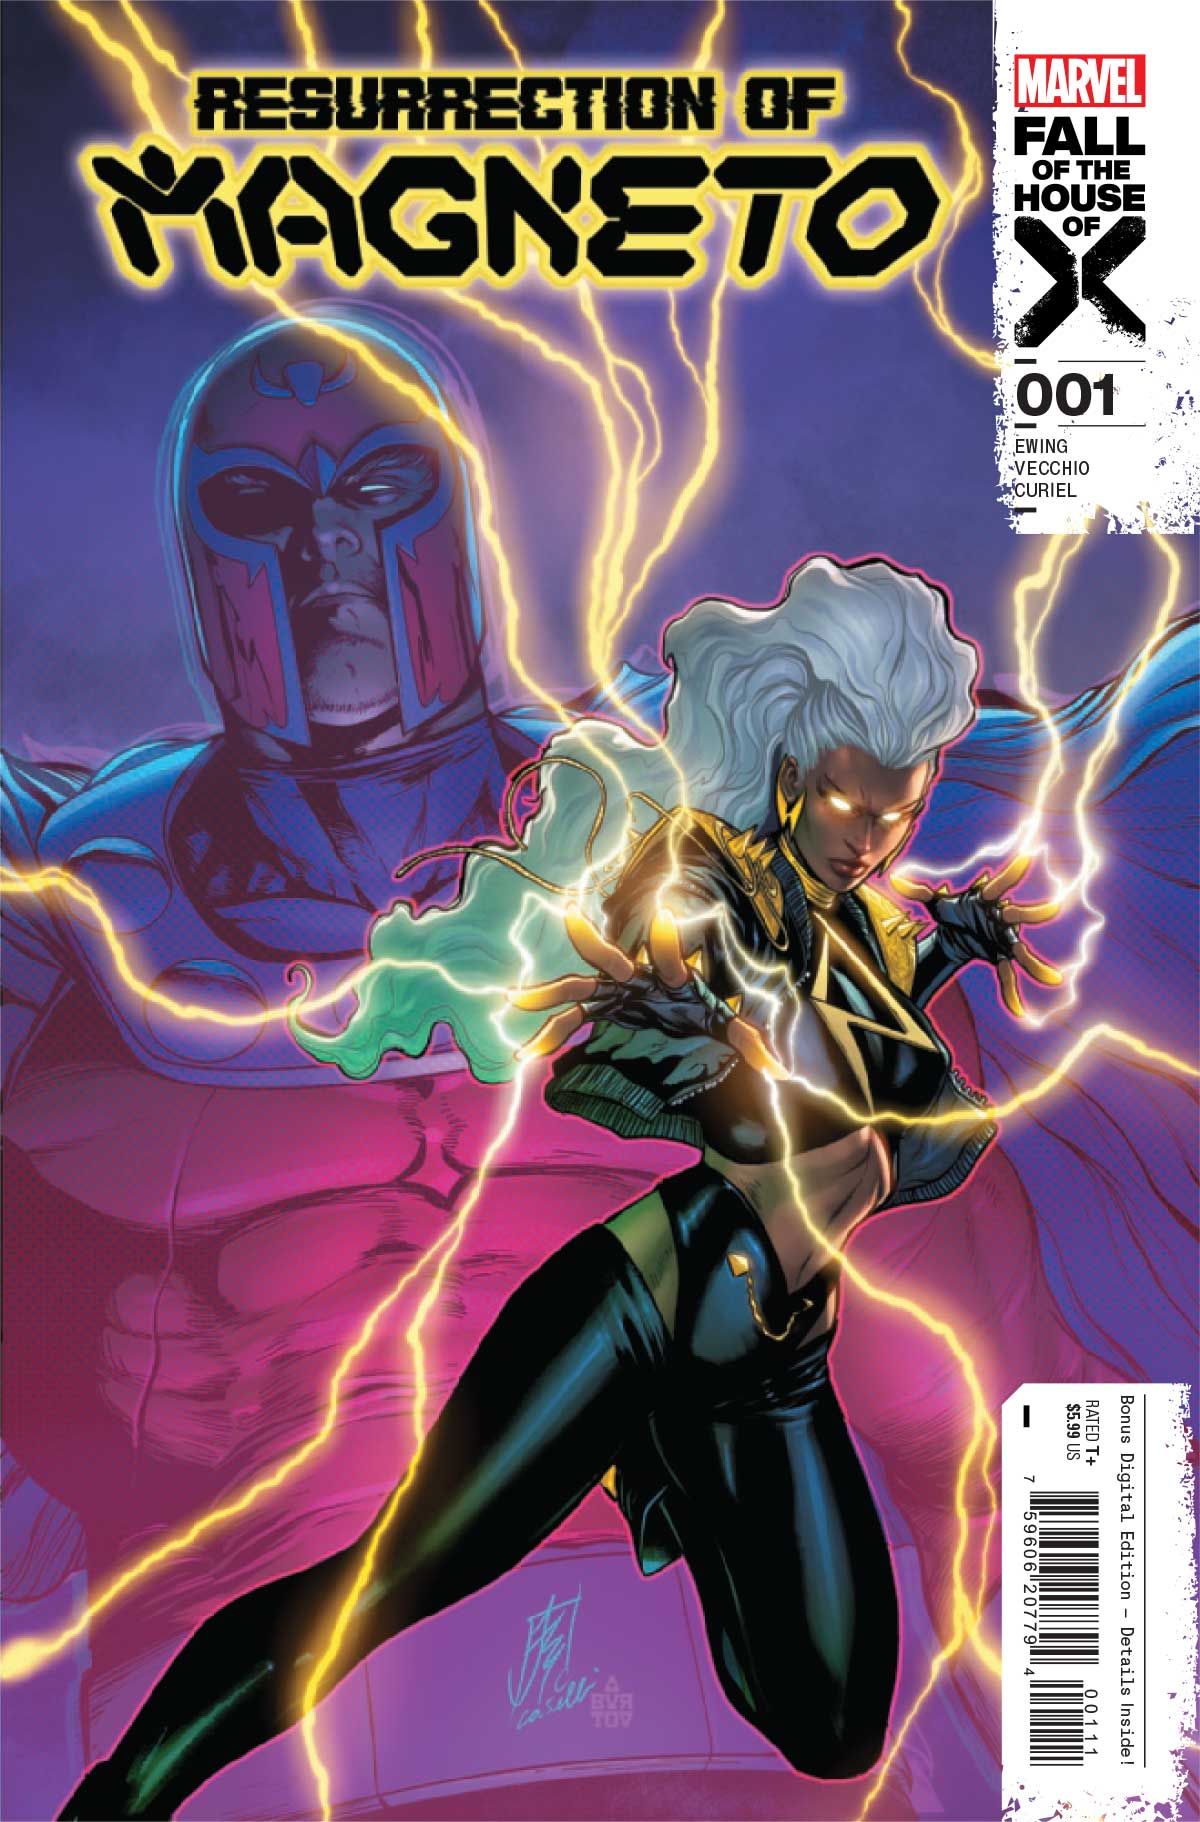 Resurrection of Magneto #1 cover shows Storm utilizing lightning with Magneto behind her